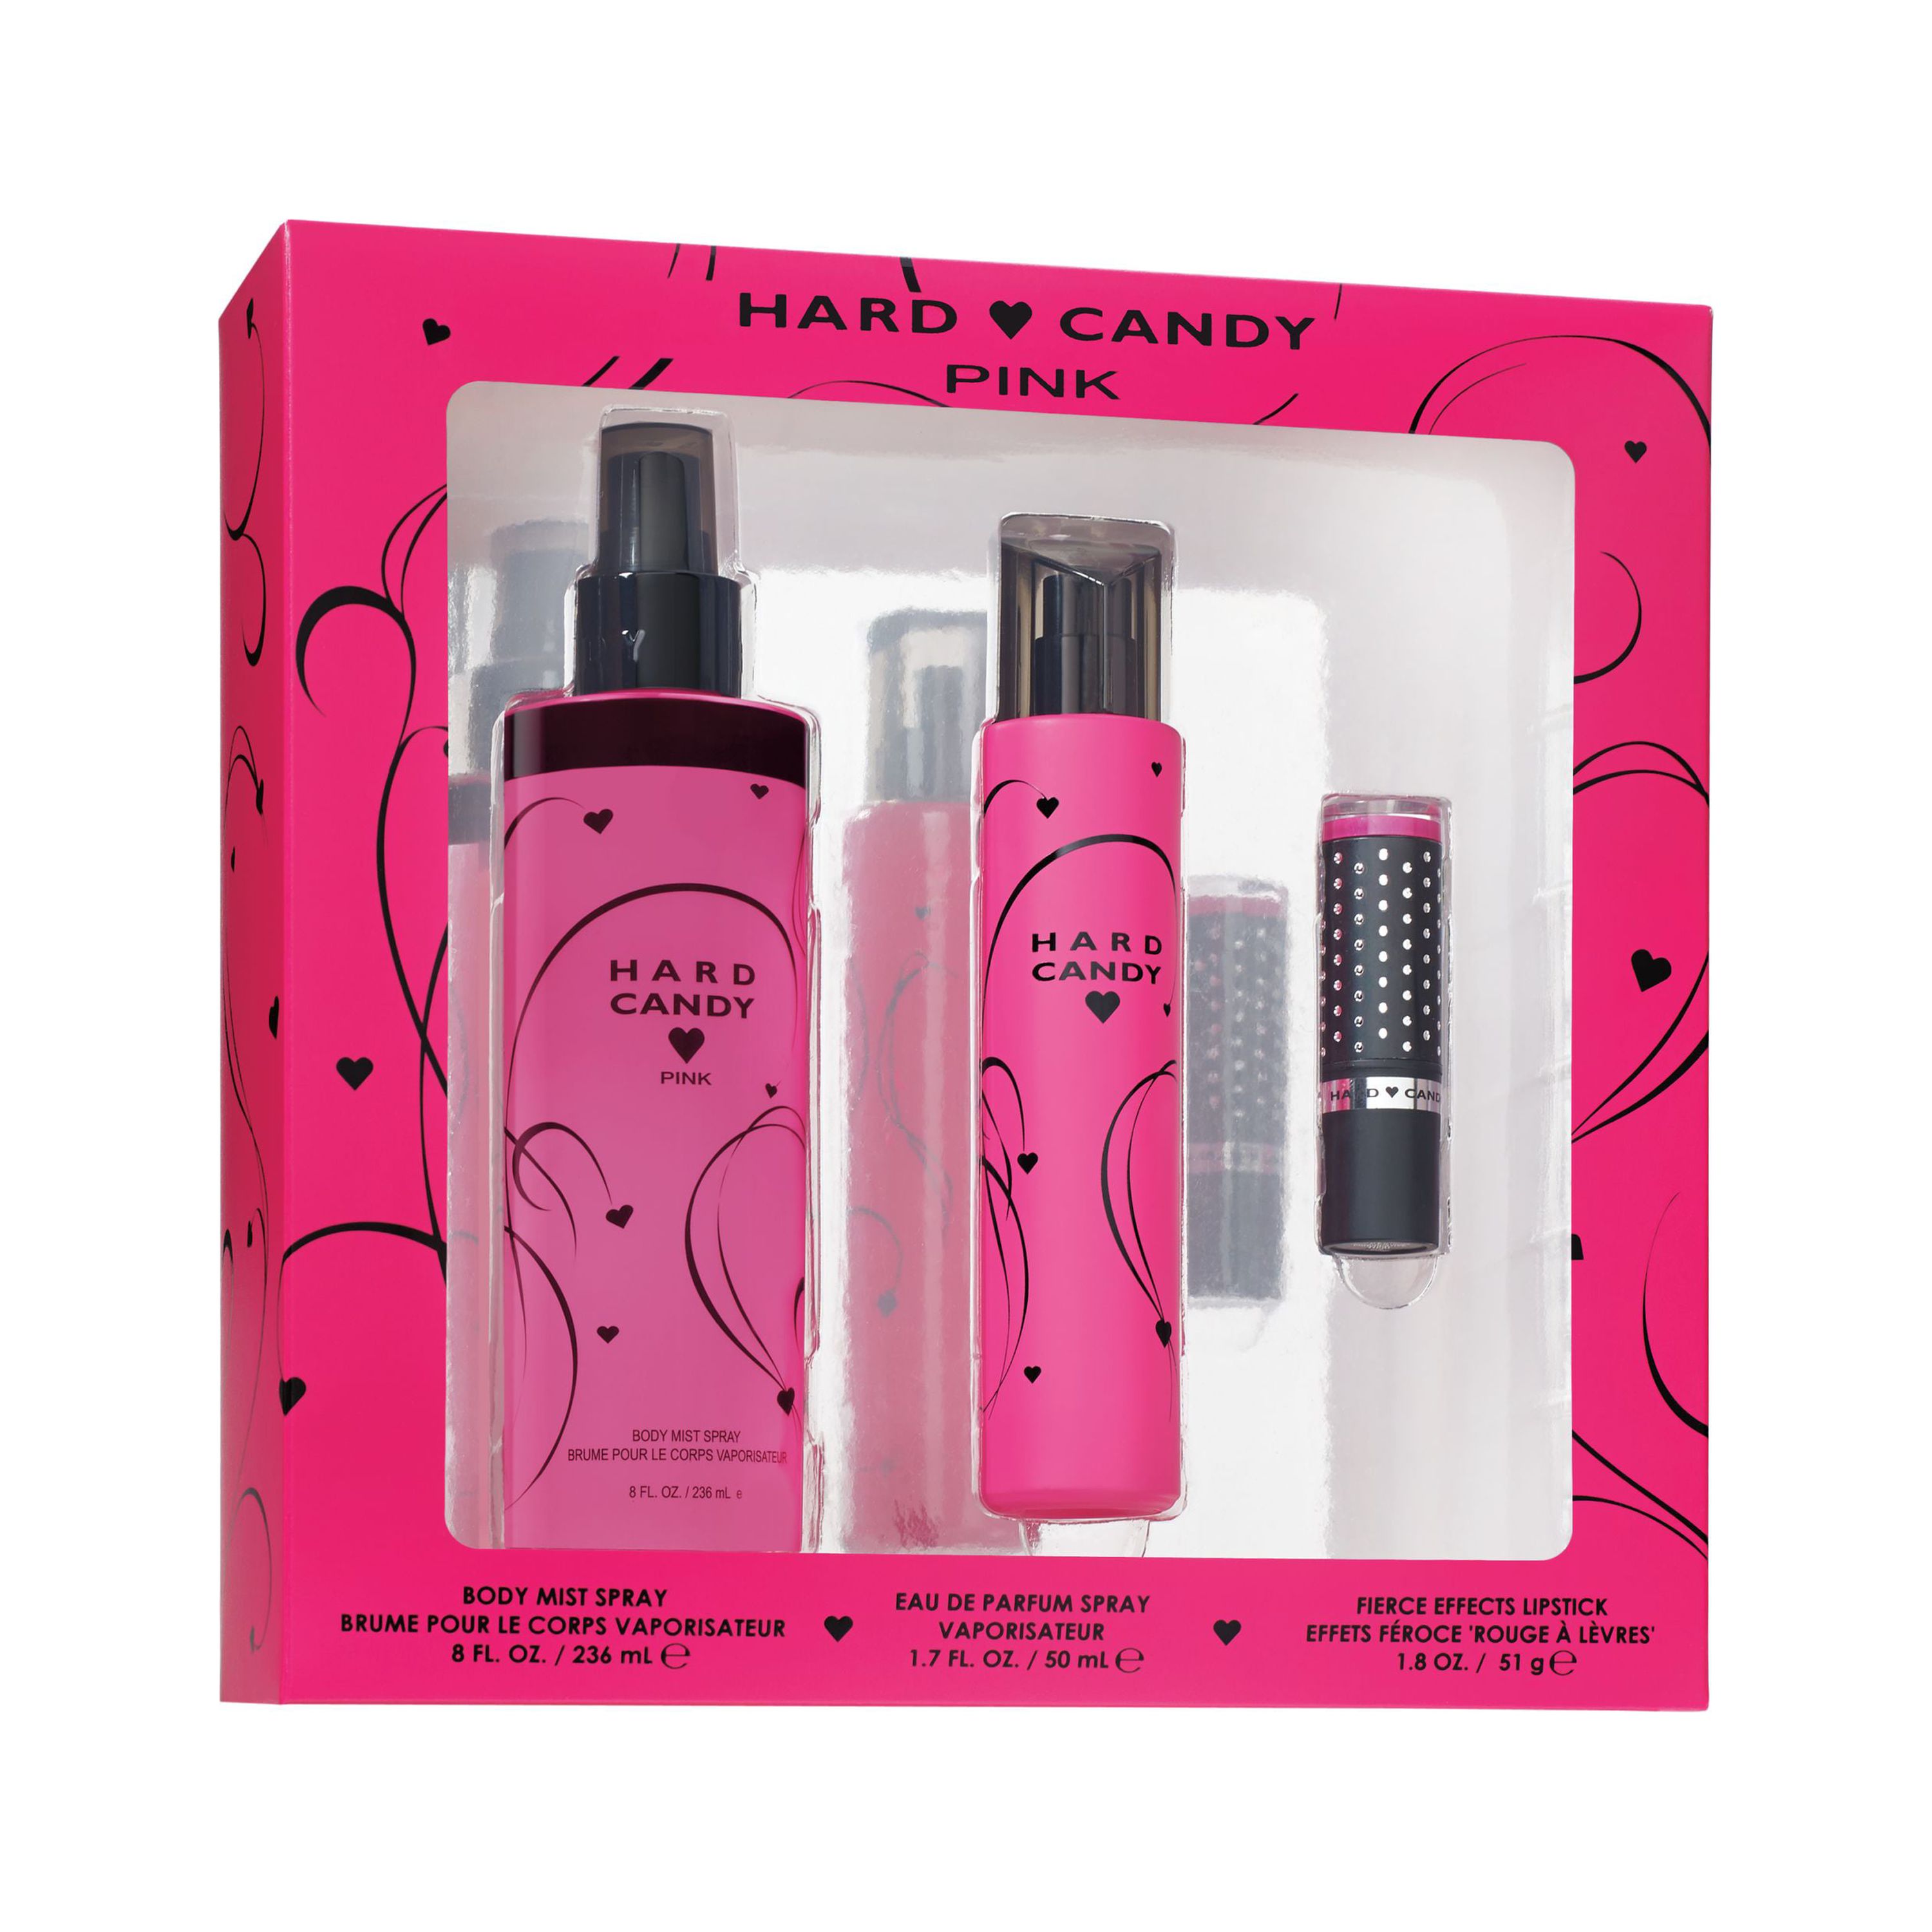 Hard Candy Pink Fragrance Gift Set for Women, 3 pc - image 1 of 1